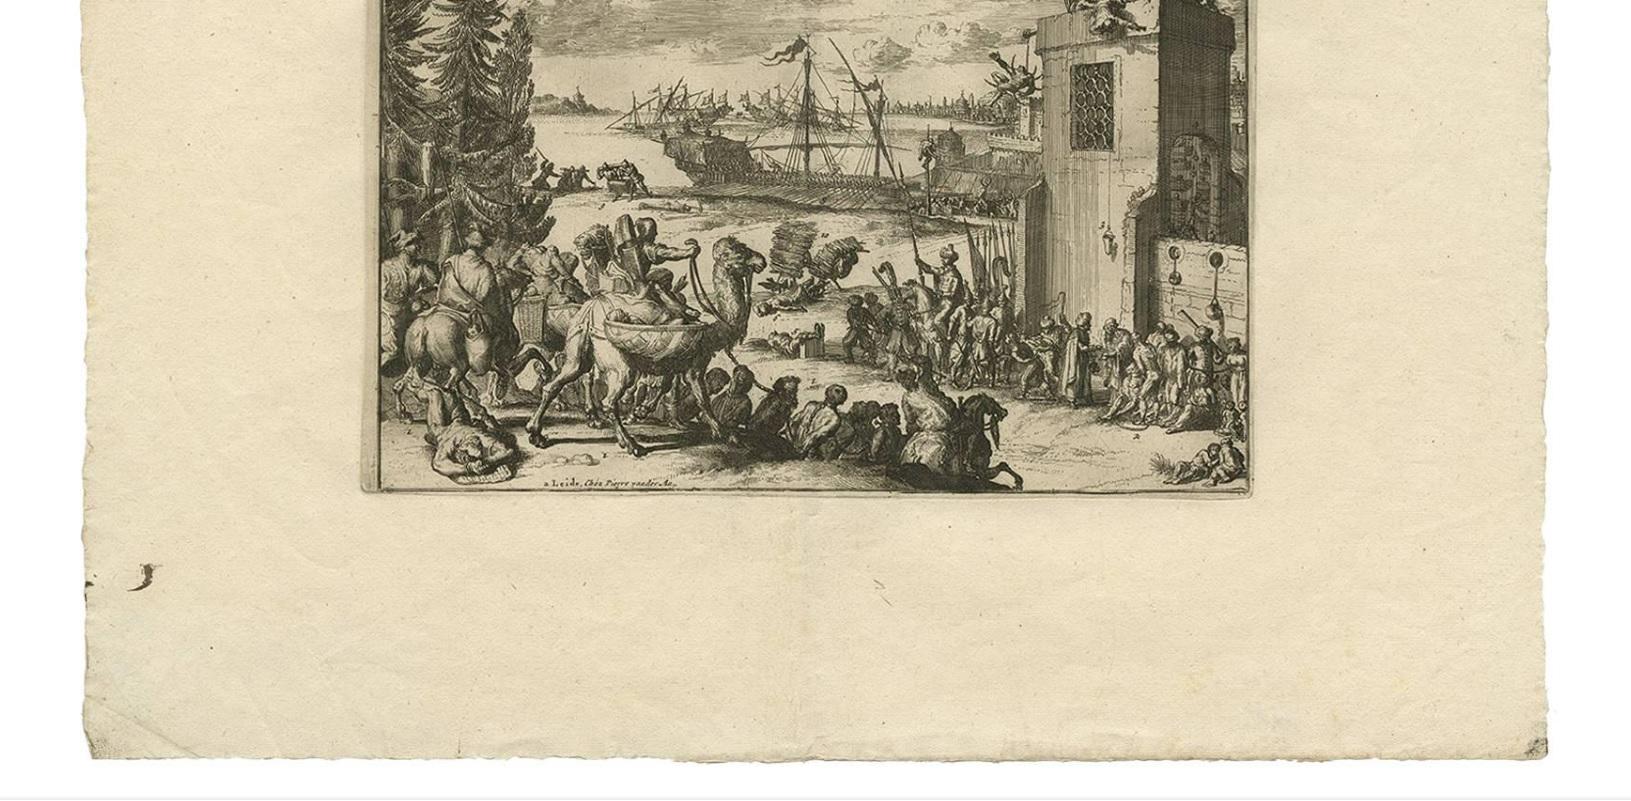 Rare antique print, in this scene: 1. Tatars with slaves and their cruelty. 2. Slave market. 3. Charity bag at the jail tower. 4. Their miserable life. 5. Feet punishment / torture. 6. Thrown before the birds. 7. Sticked. 8. Transported on a galley.